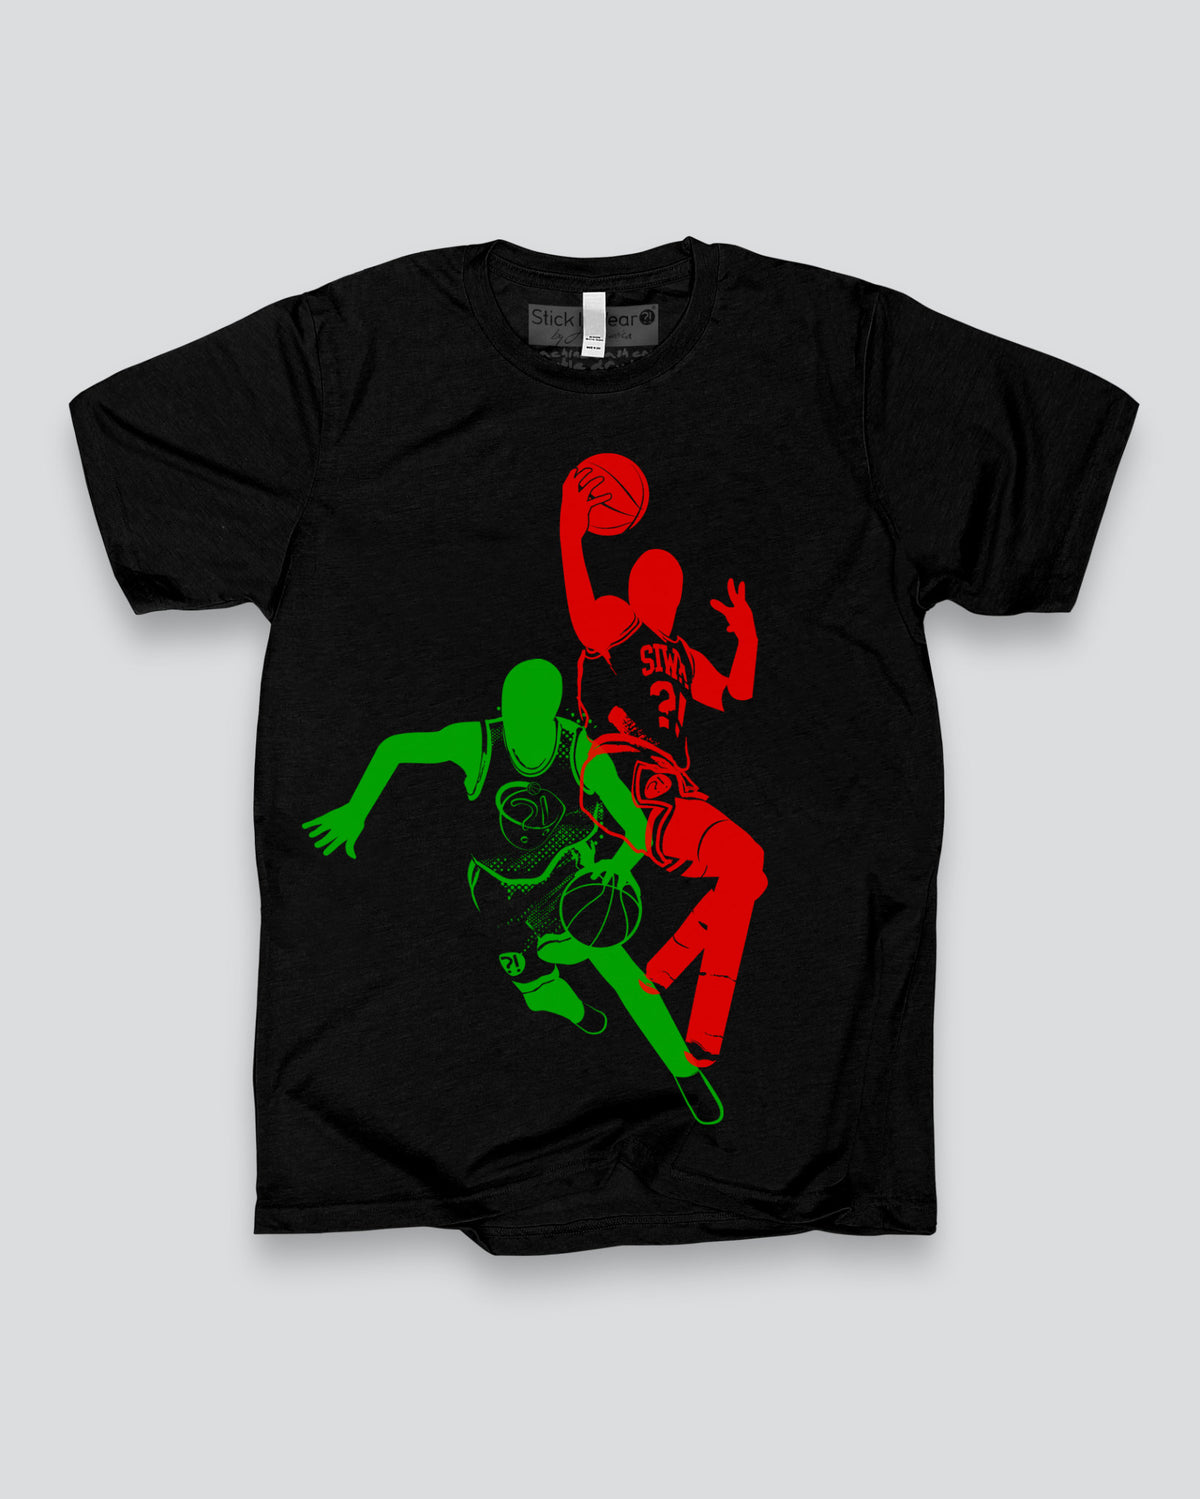 A SPECTACULAR MOVE 04 Basketball Stance T-Shirt